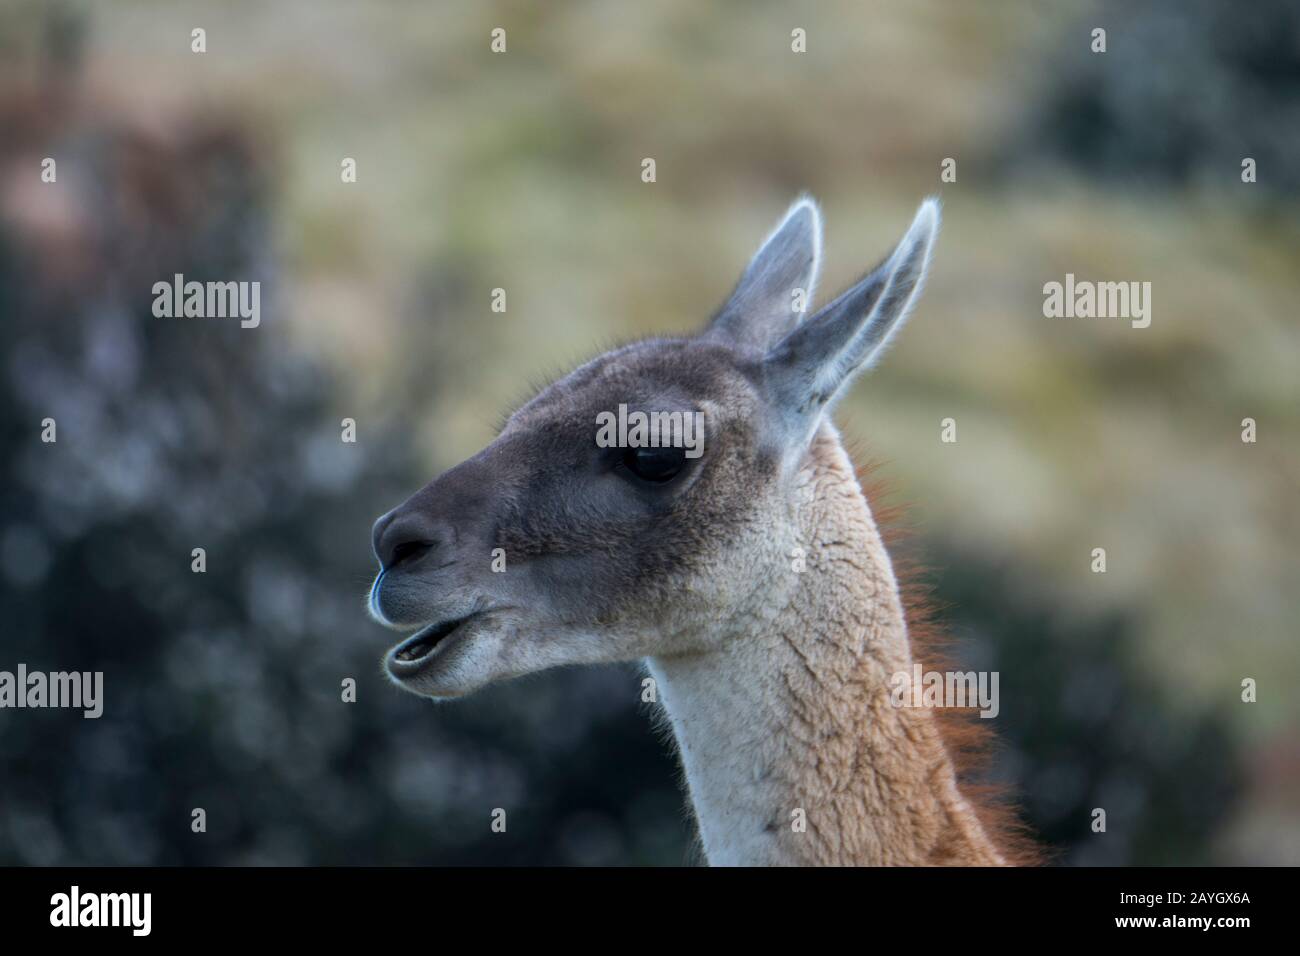 Close-up of a Guanaco (Lama guanicoe) on ranch land near Torres del Paine National Park in southern Chile. Stock Photo